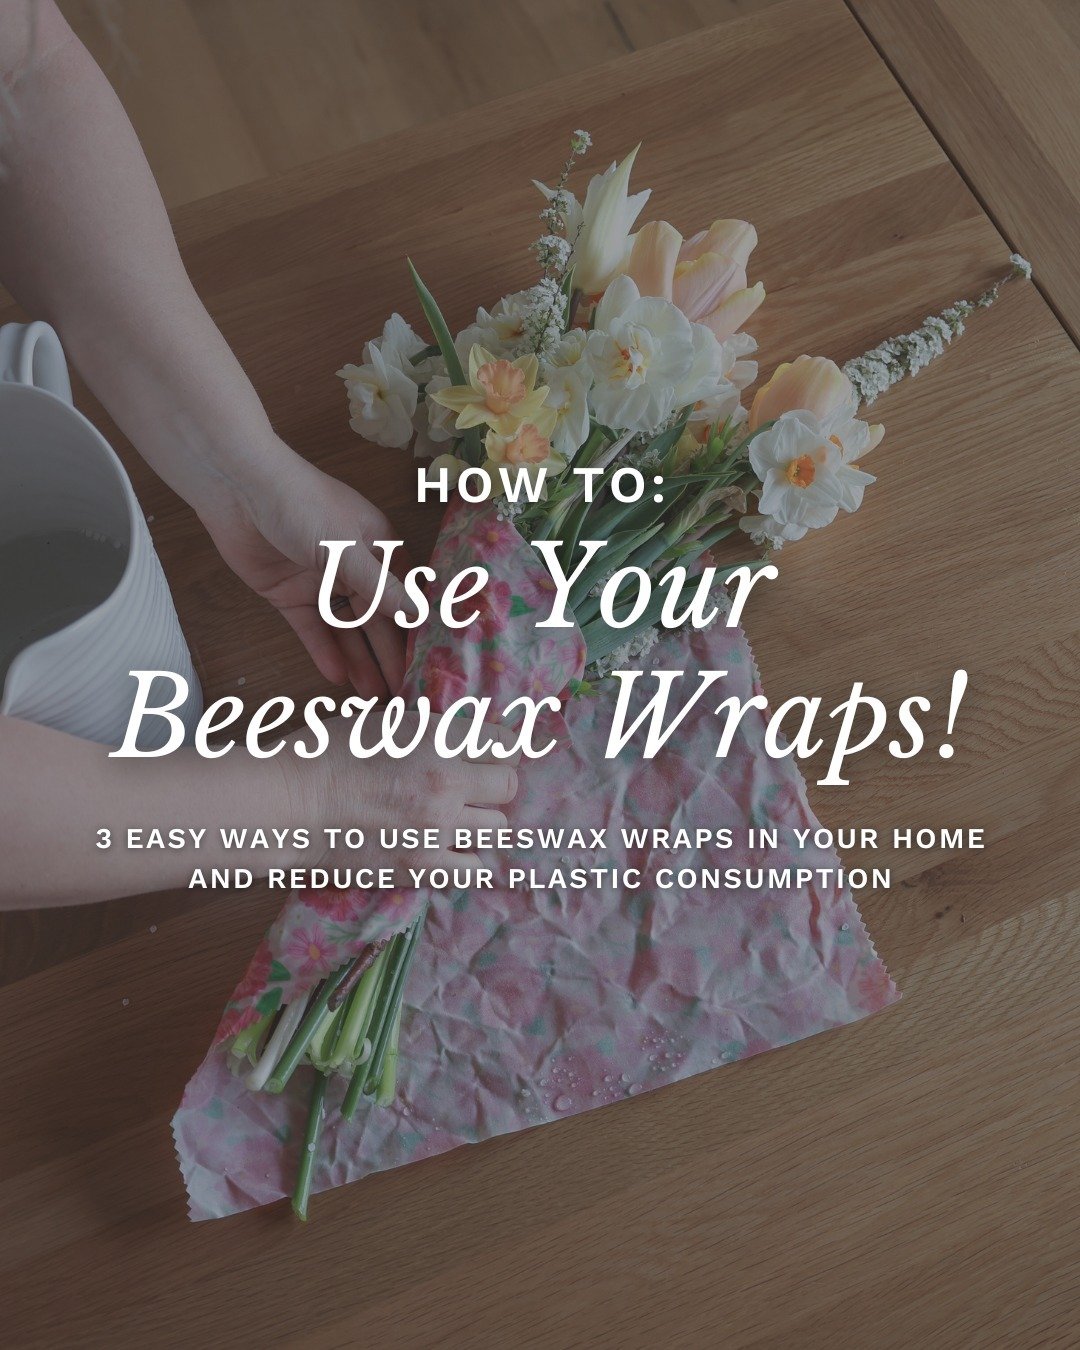 🐝 Shop our LIMITED EDITION garden-themed beeswax wraps variety set with @naturebeegoods! 🌎 Ships worldwide!

Comment &quot;bee&quot; below and I'll DM you the link to shop! 🌼⬇️

A wonderful Mother's Day gift, and a great way to reduce single-use p